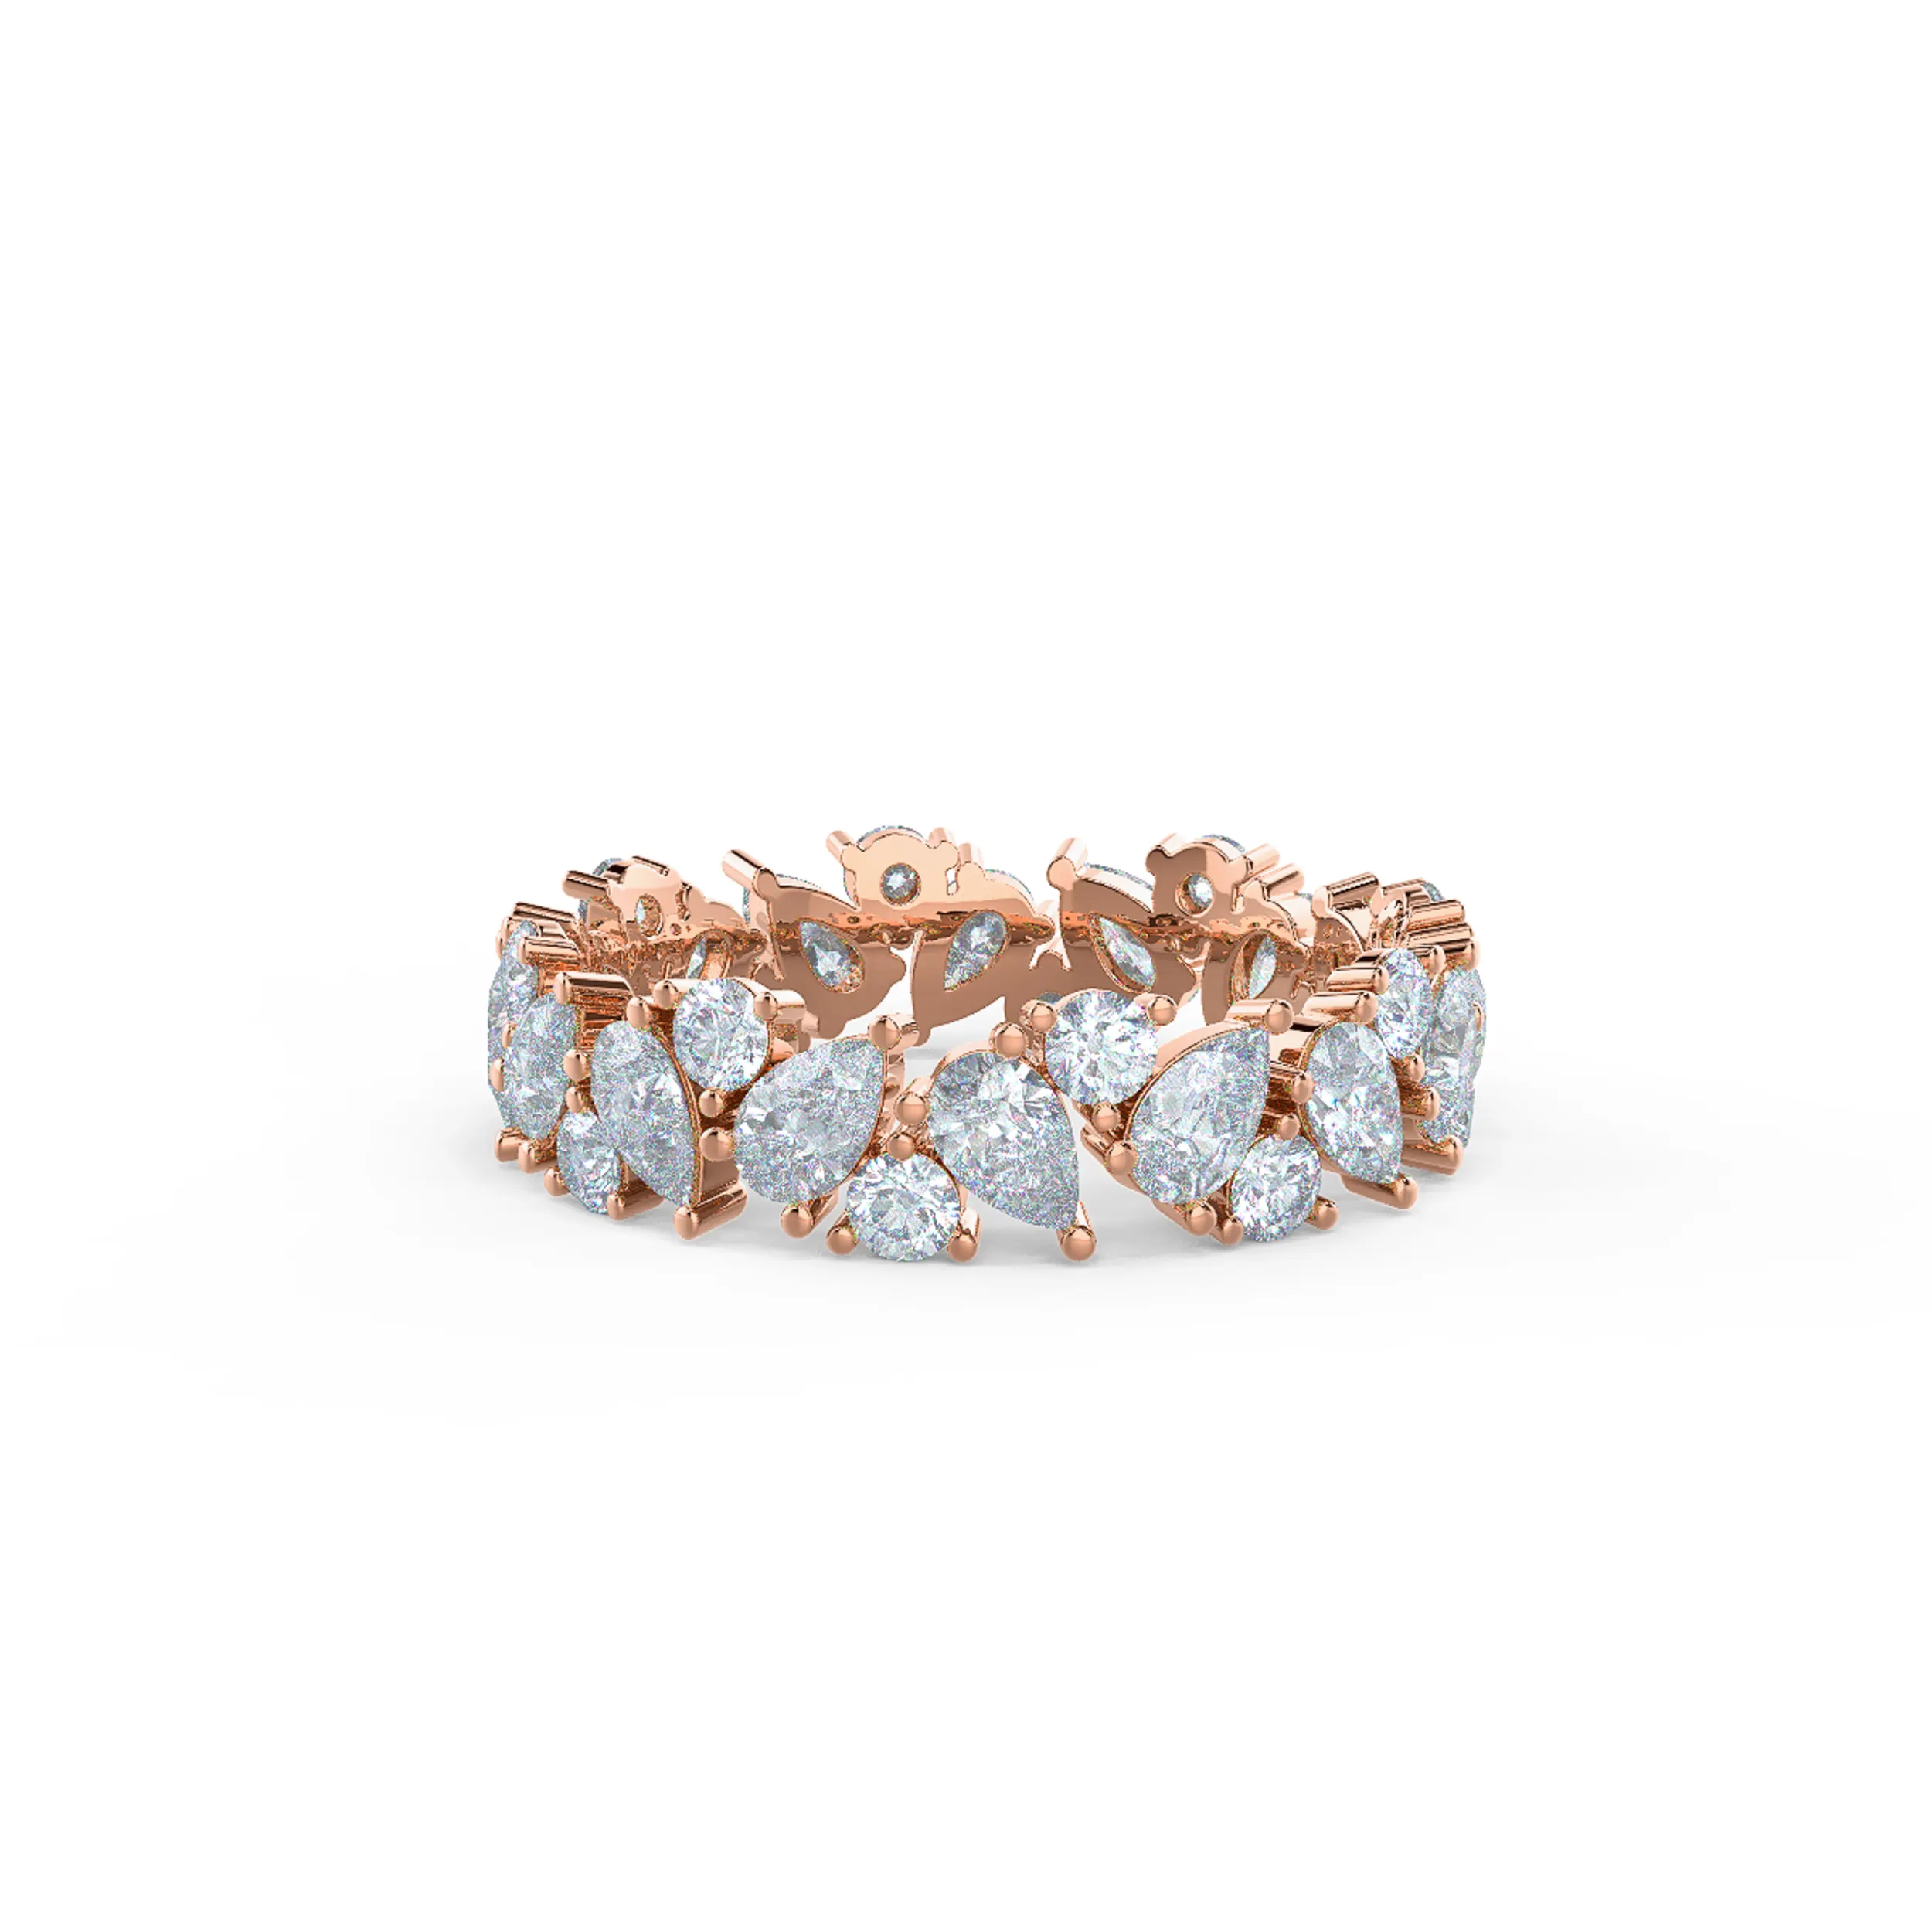 14k Rose Gold Theresa Eternity Band featuring Hand Selected 2.2 ct Man Made Diamonds (Main View)